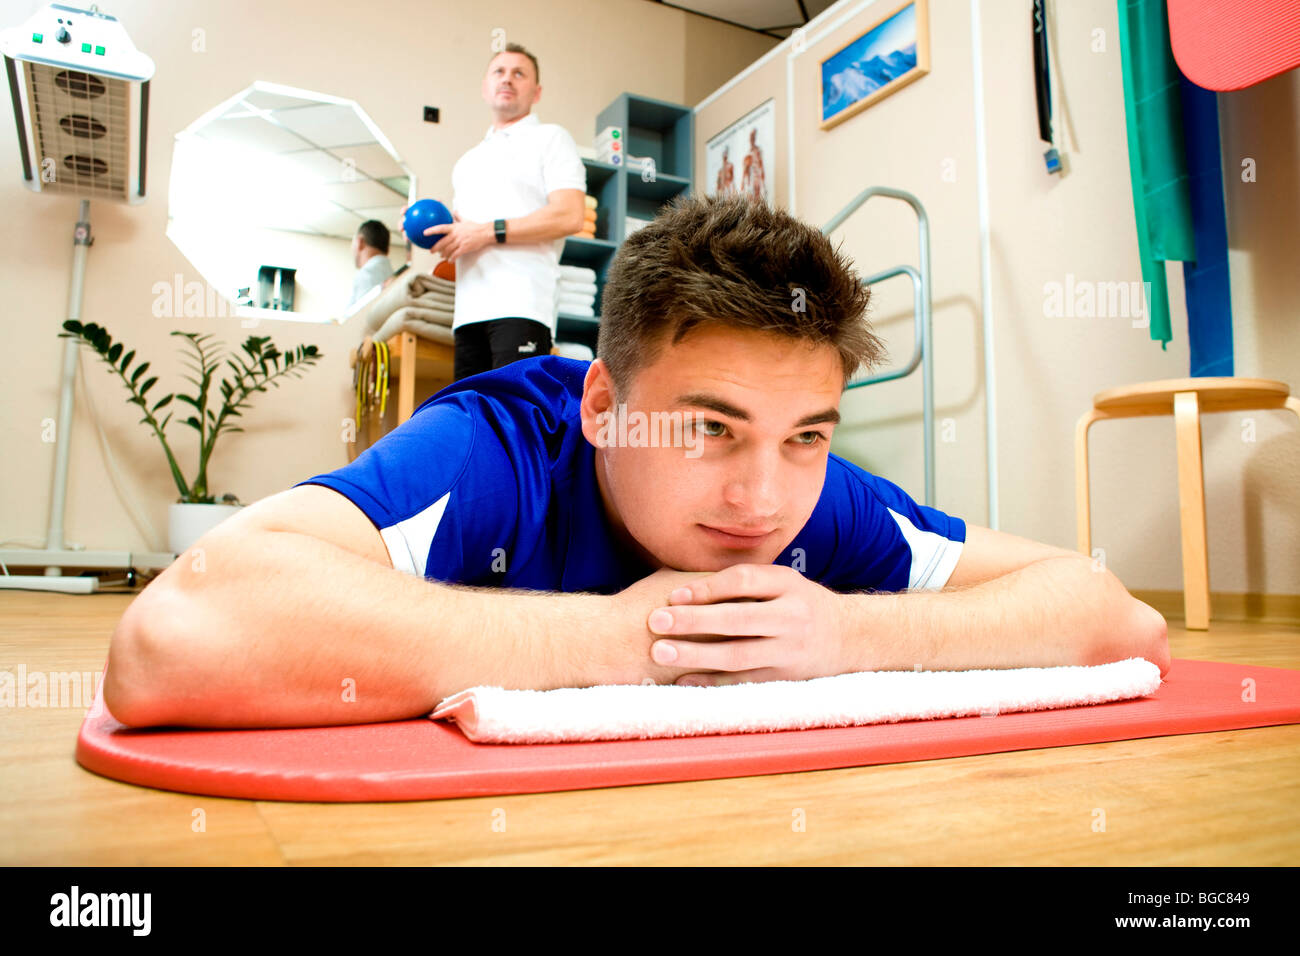 Physiotherapist and patient doing physiotherapy Stock Photo